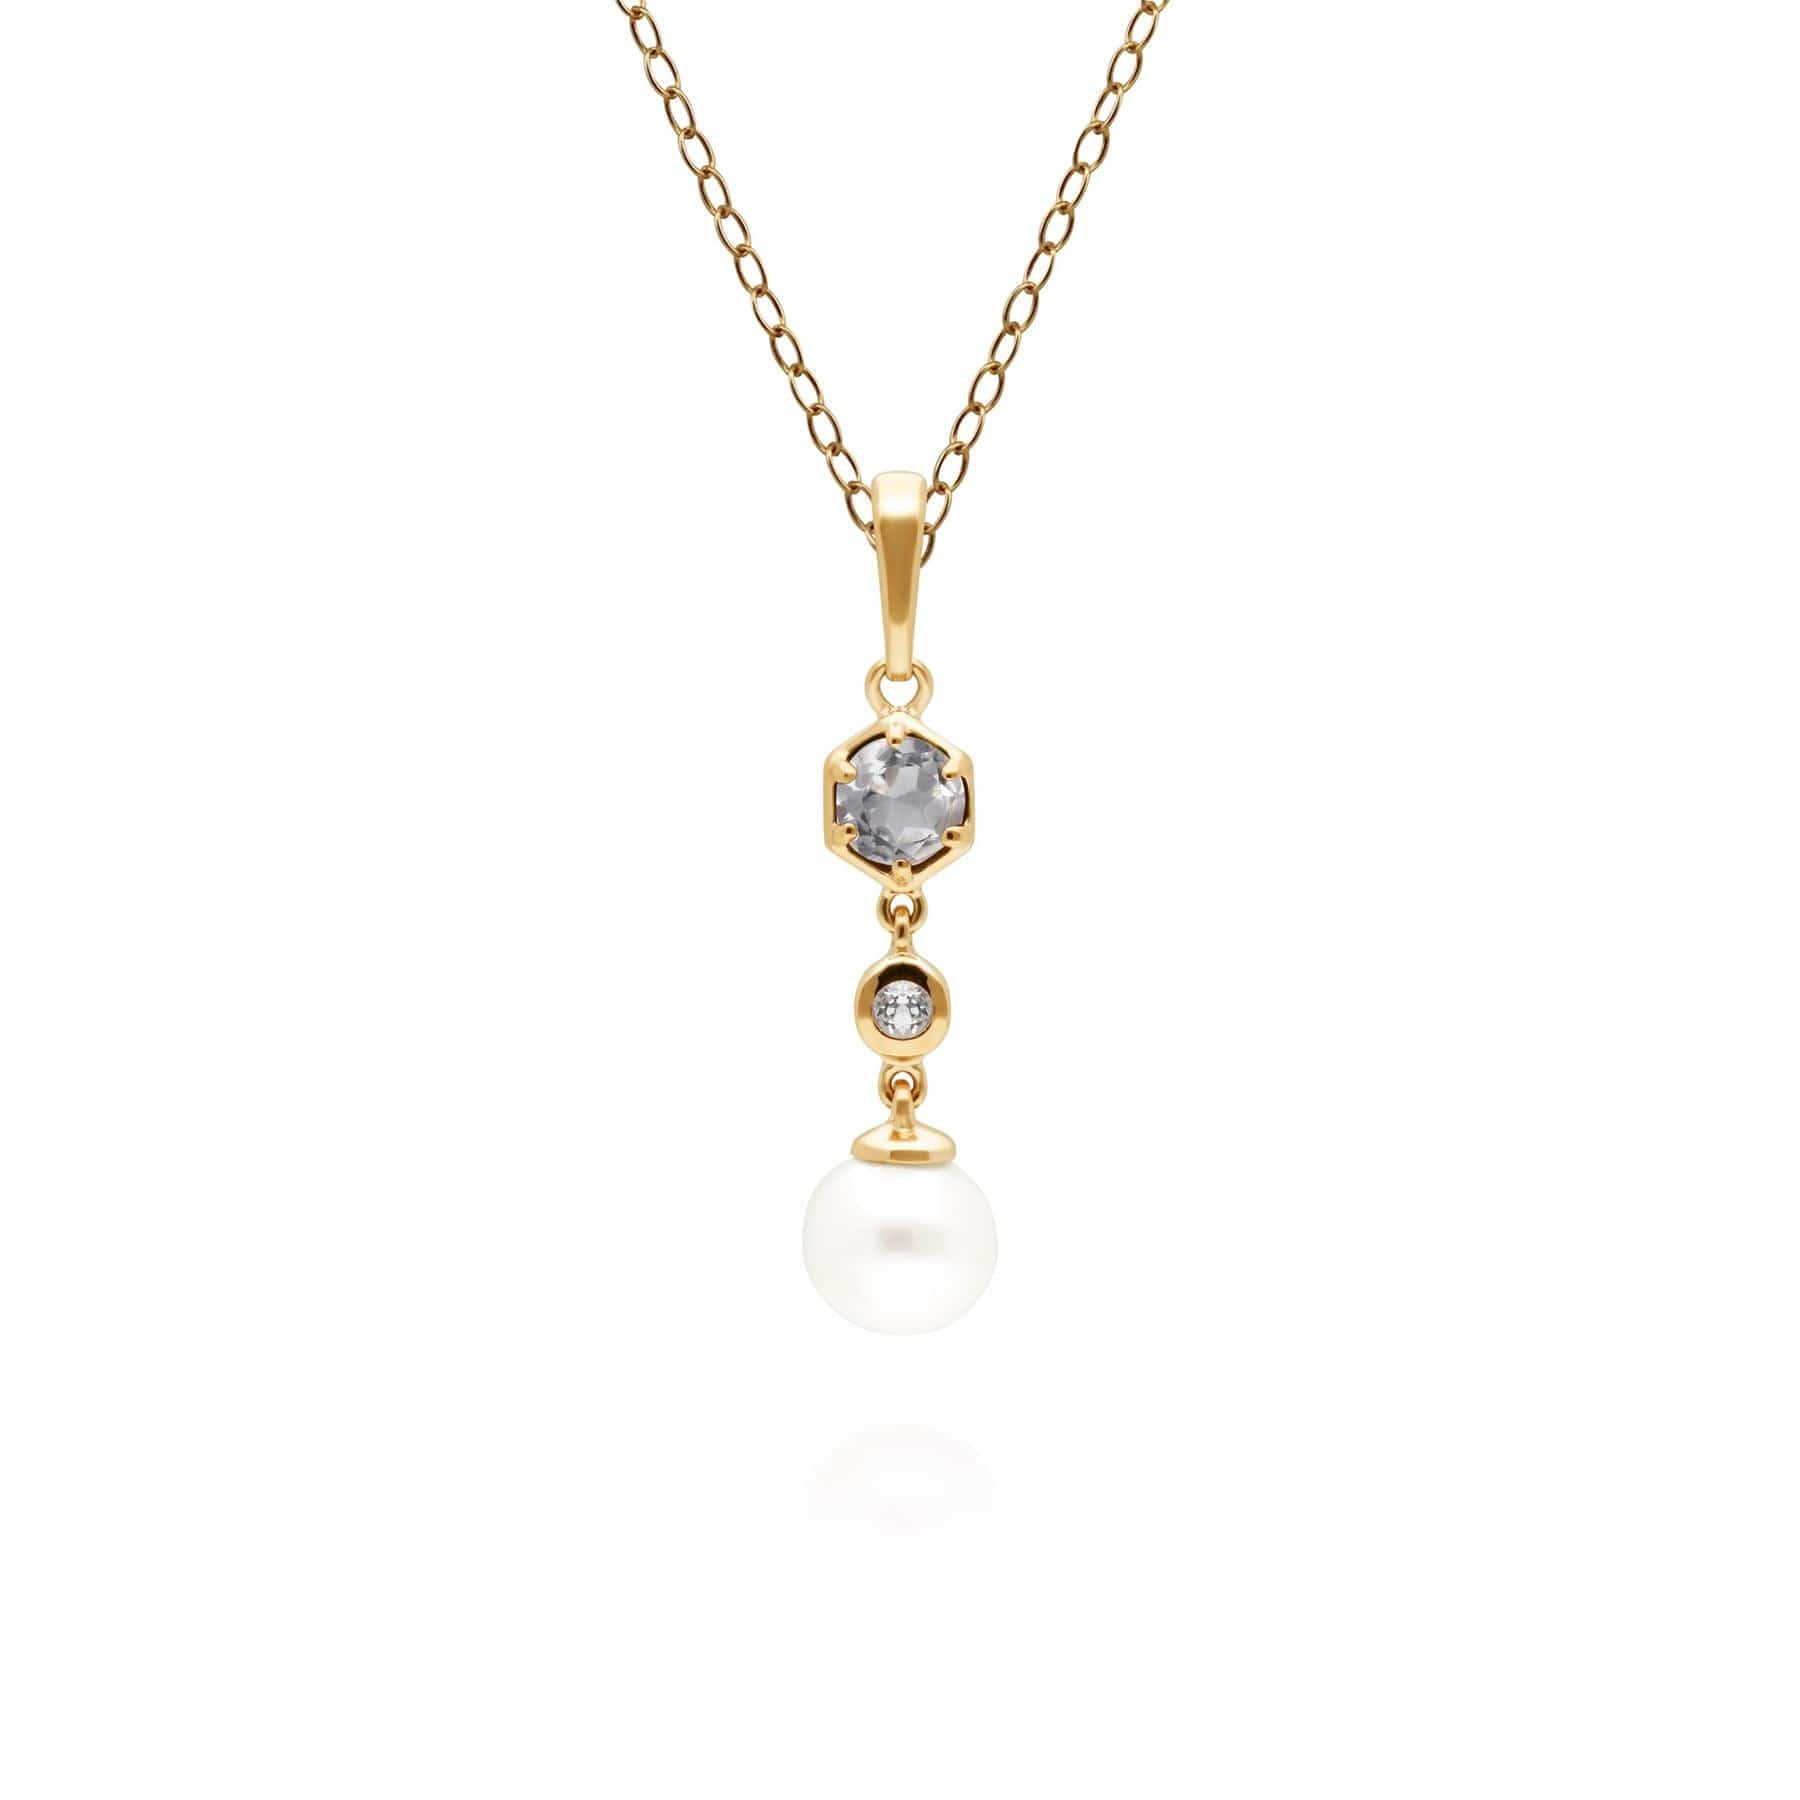 Photos - Pendant / Choker Necklace Modern Pearl & White Topaz Drop Pendant in Gold Plated Silver